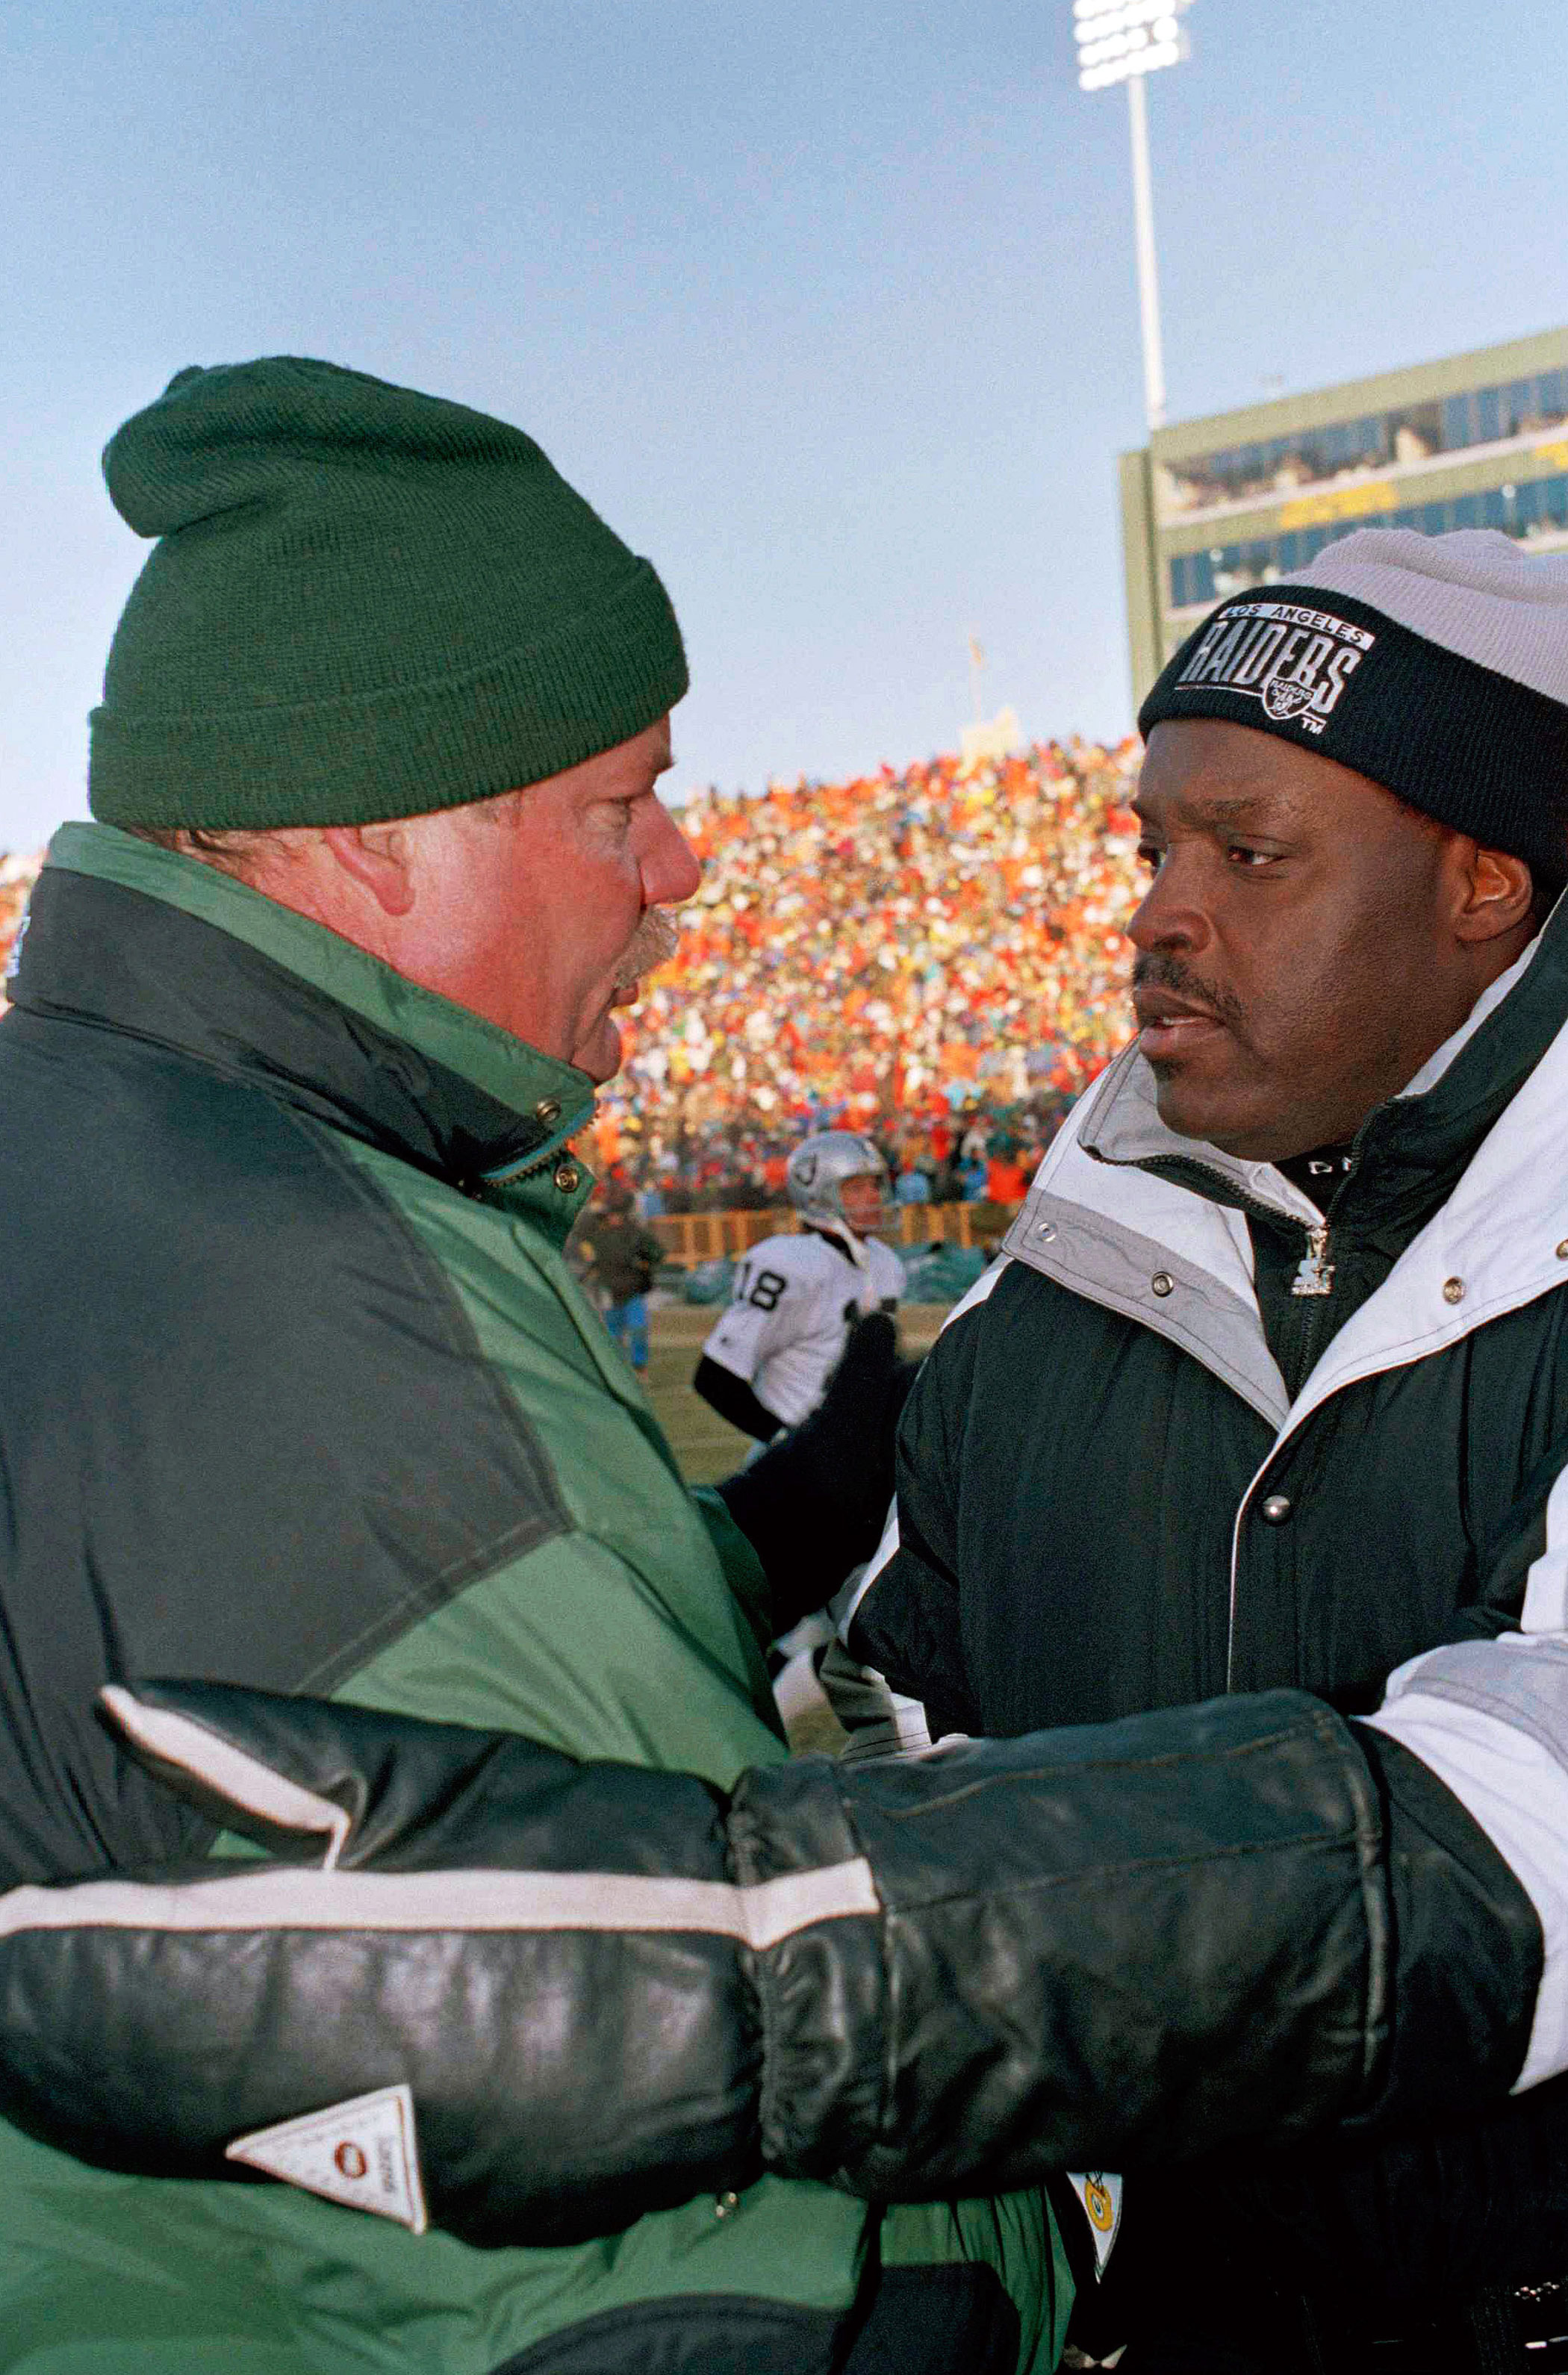 Temperature: 0°F On Dec. 26, 1993, the Green Bay Packers faced the Los Angeles Raiders in an NFL football game. Here, coaches Mike Holmgran and Art Shell greet each other in Green Bay, Wis.